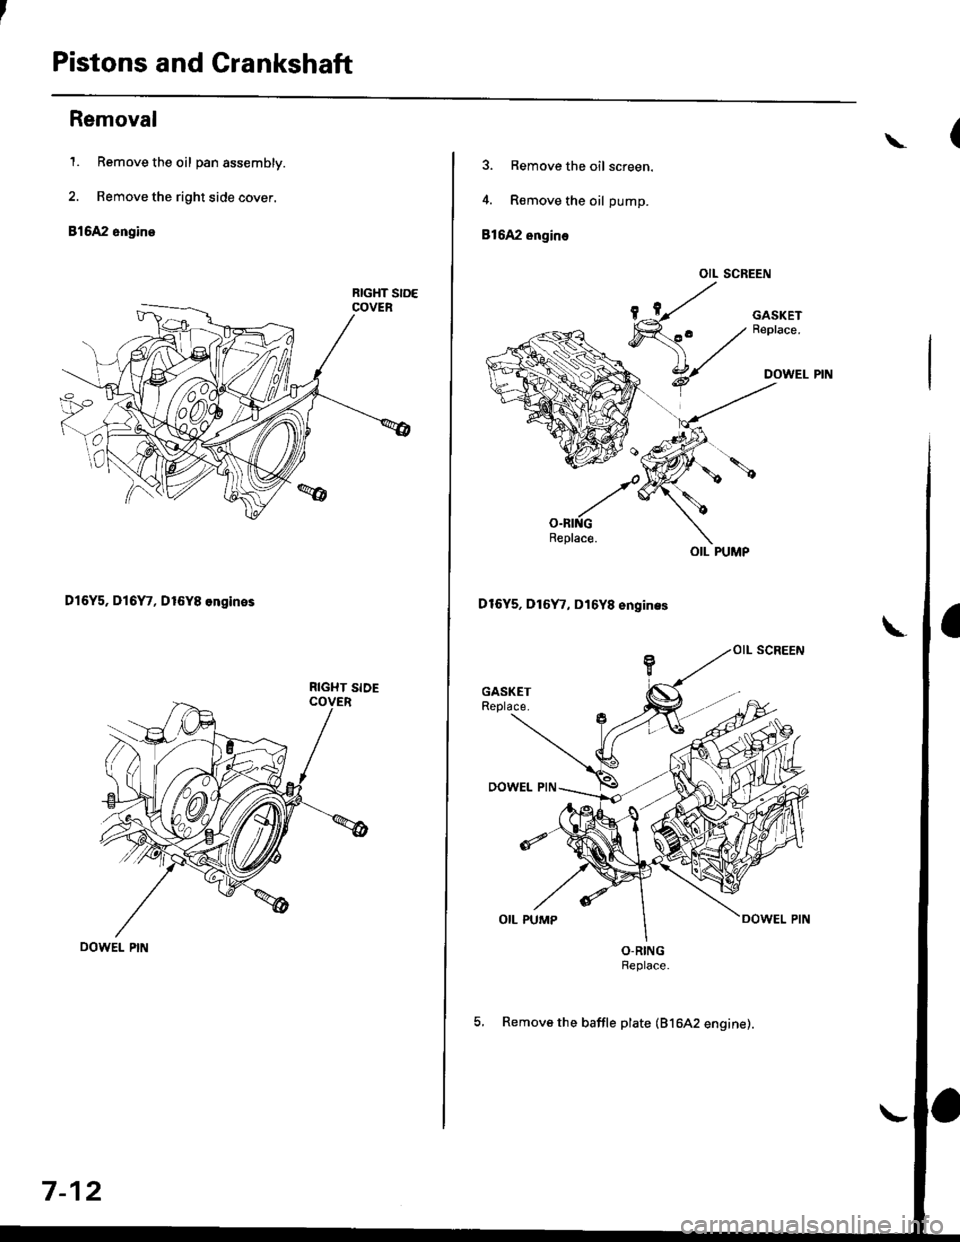 HONDA CIVIC 1996 6.G User Guide Pistons and Crankshaft
Removal
1. Remove the oil pan assembly.
2. Remove the right side cover.
816A2 engine
D16Y5, Dl6Y7, D16Y8 ongines
RIGHT SIDE
7-12
\
3. Remove the oil screen.
4. R€move the oil 